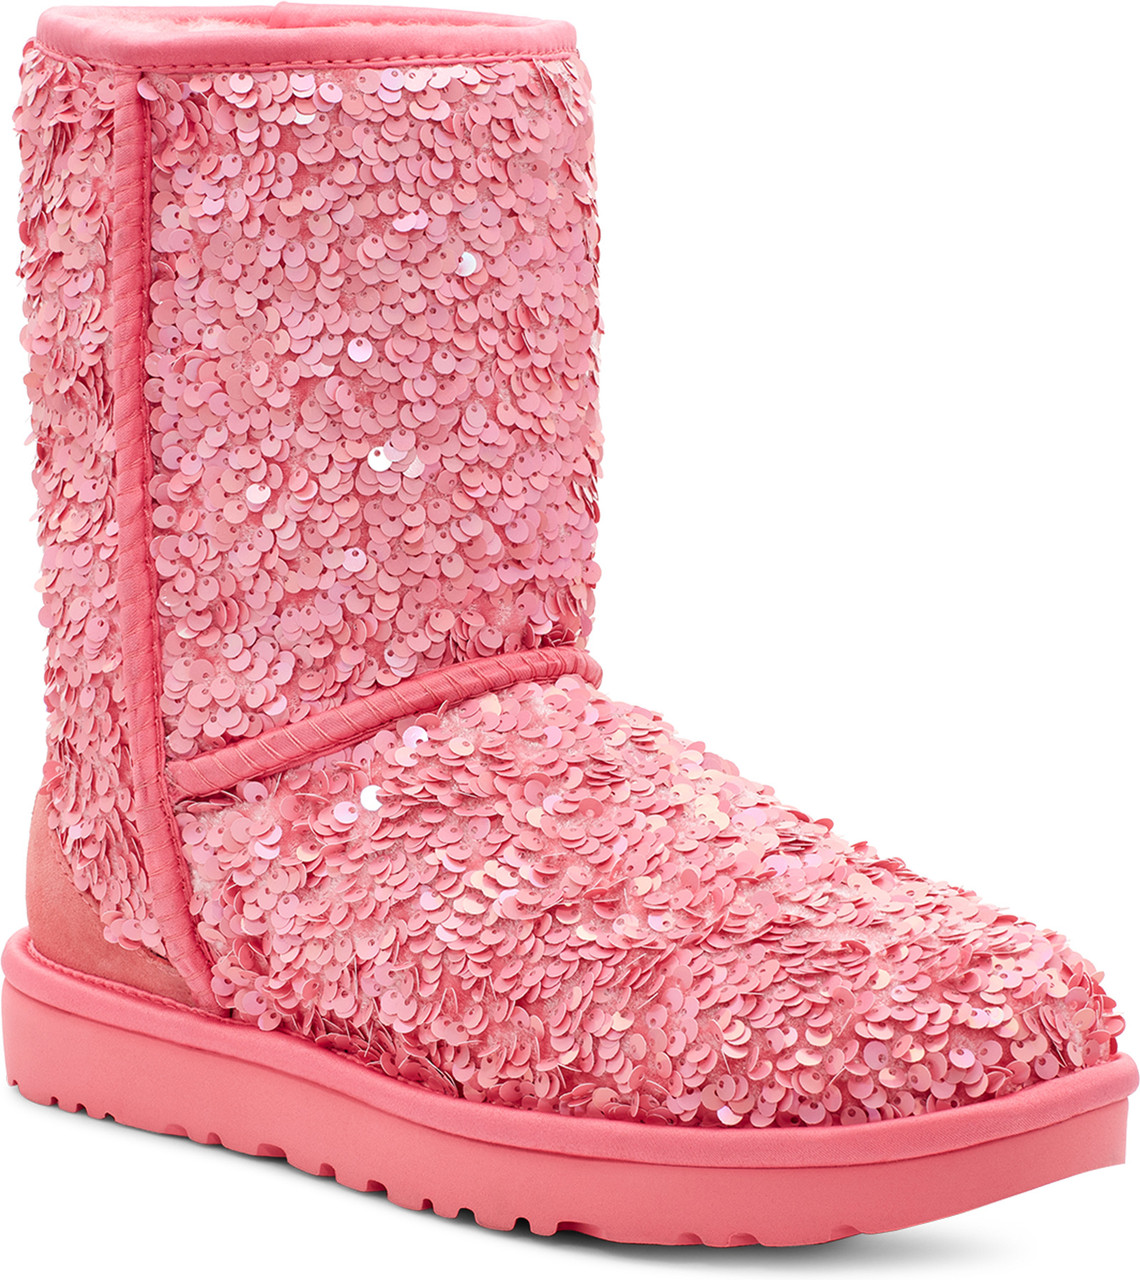 UGG Classic Short Sequin Boots Pink Size 8 - $149 (21% Off Retail) New With  Tags - From Awuraposh